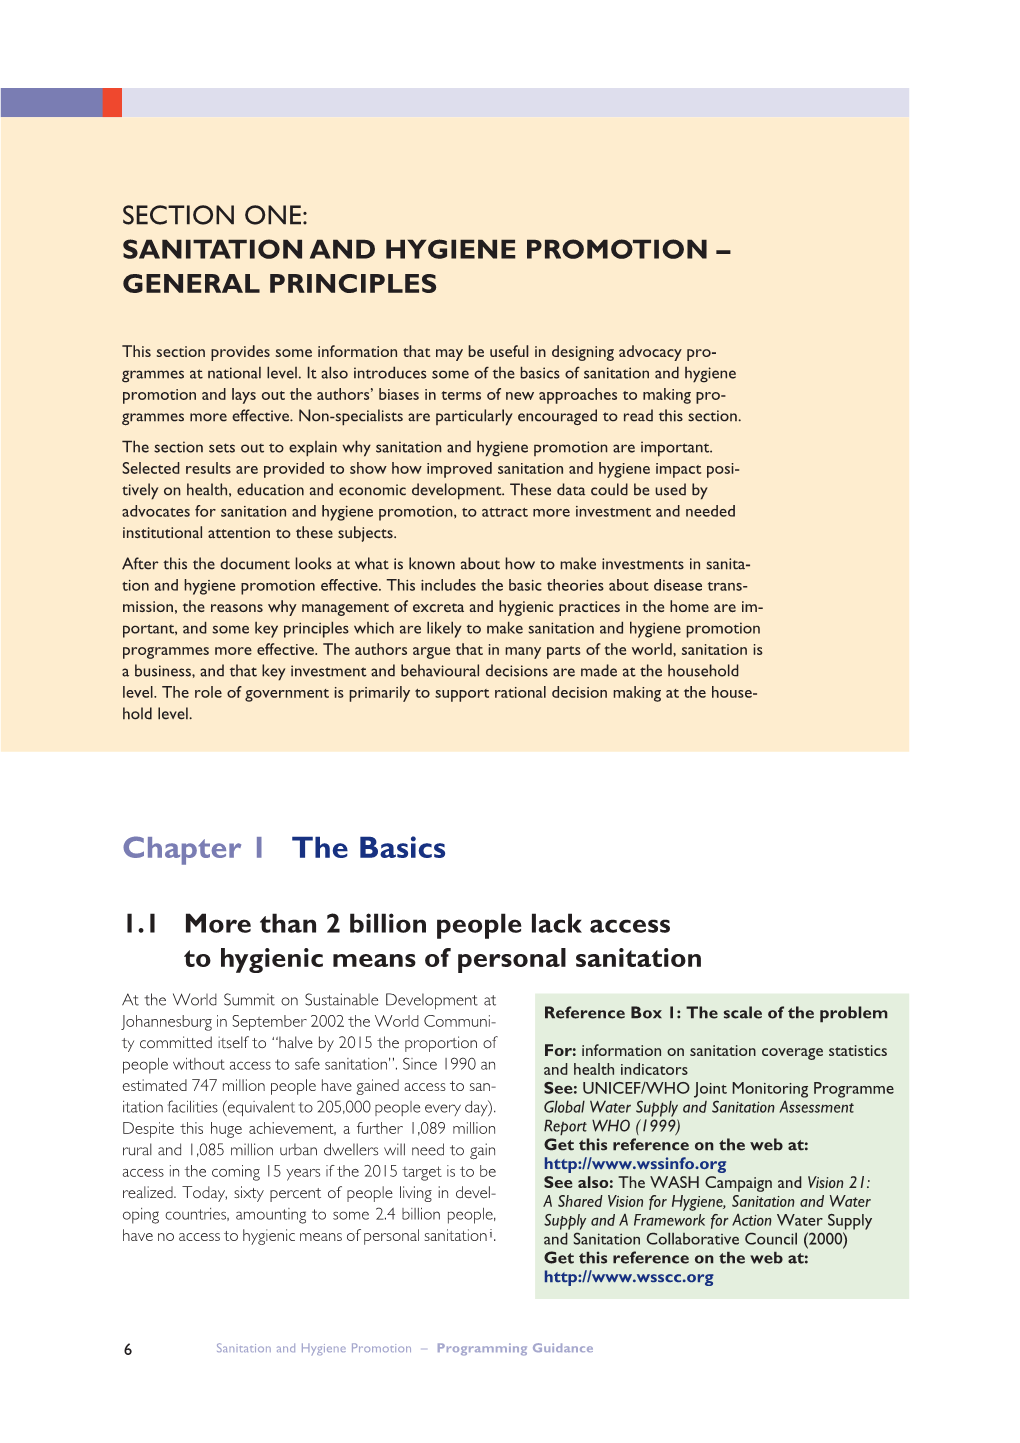 Section One: Sanitation and Hygiene Promotion – General Principles